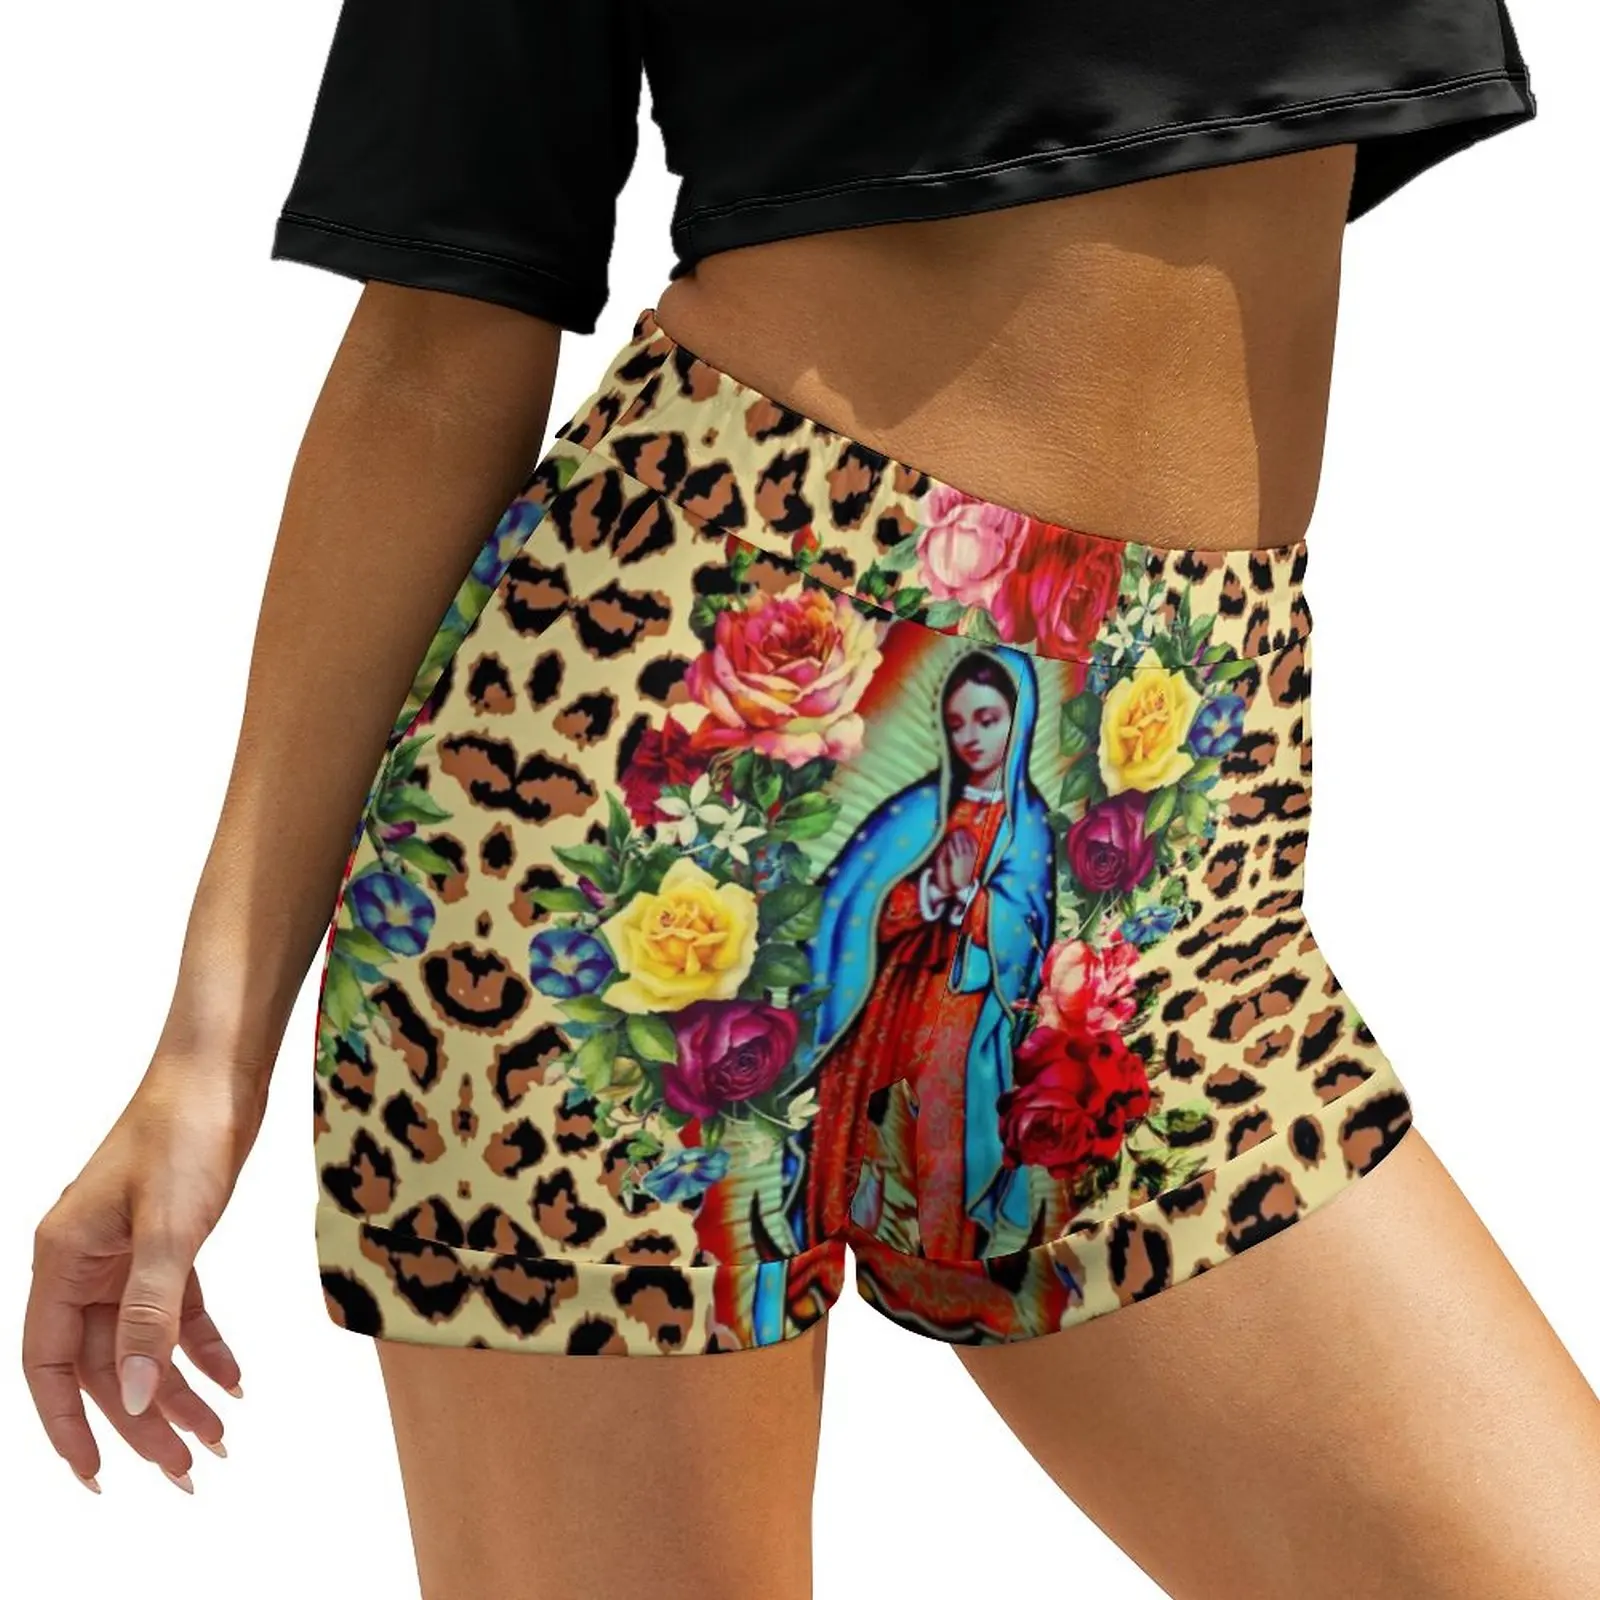 

Guadalupe Virgin Mary Shorts High Waisted Floral Print Printed Shorts Sexy Oversized Short Pants Slim Bottoms Gift Idea